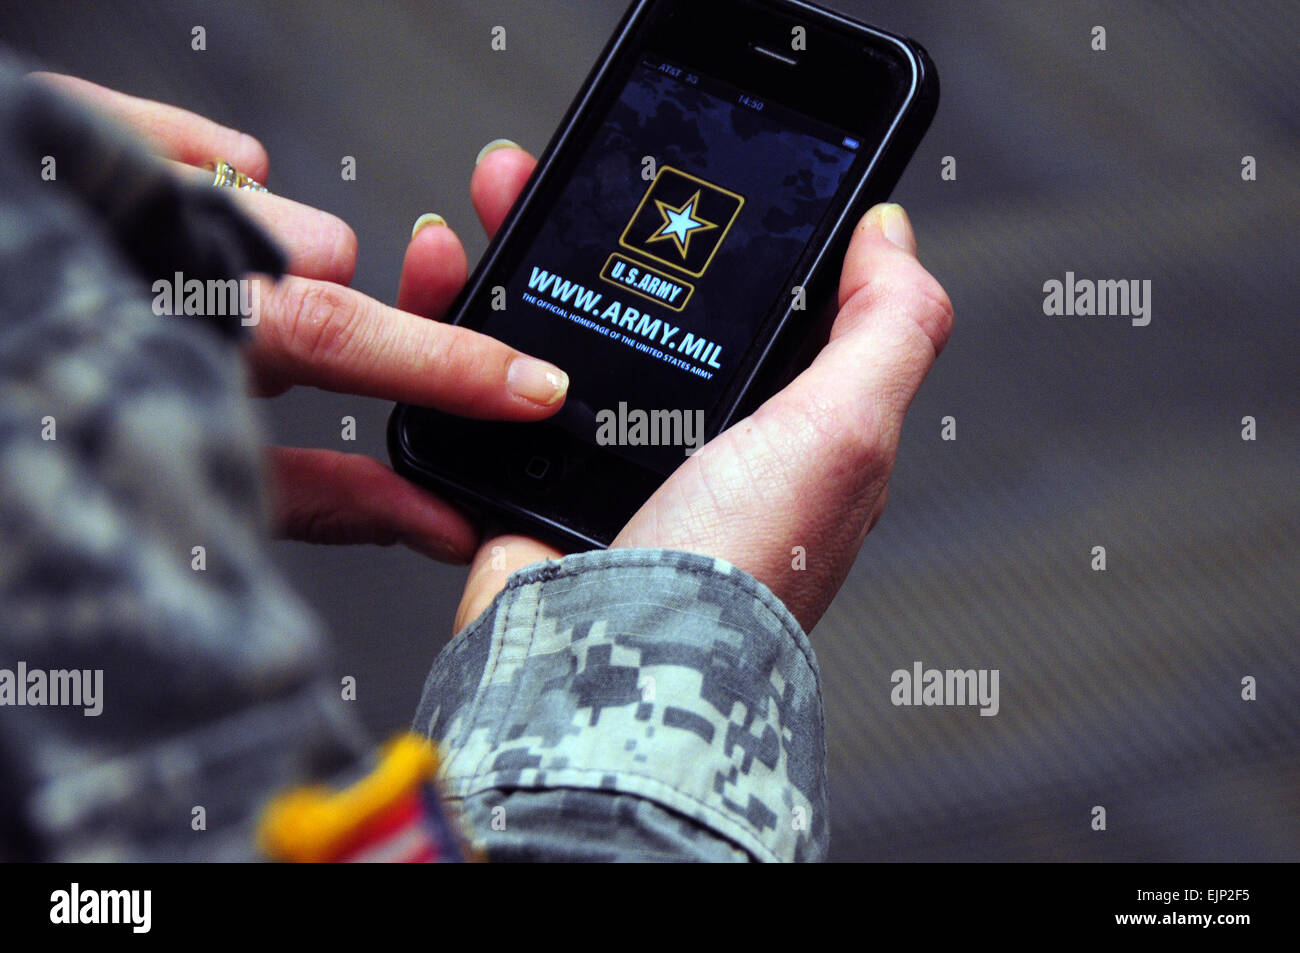 Soldiers and others can now read the latest Army news on their iPhones, thanks to a new application created by the team that developed the Army's ,     .         Army iPhone download among top 25 free news apps  /-news/2010/01/13/32841-army-iphone-download-among-top-25-free-news-apps/index.html     Download the Army iPhone app on iTunes  itunes.apple.com/us/app/us-army-news-information/id342689843?mt=8     /mobile  /mobile Stock Photo